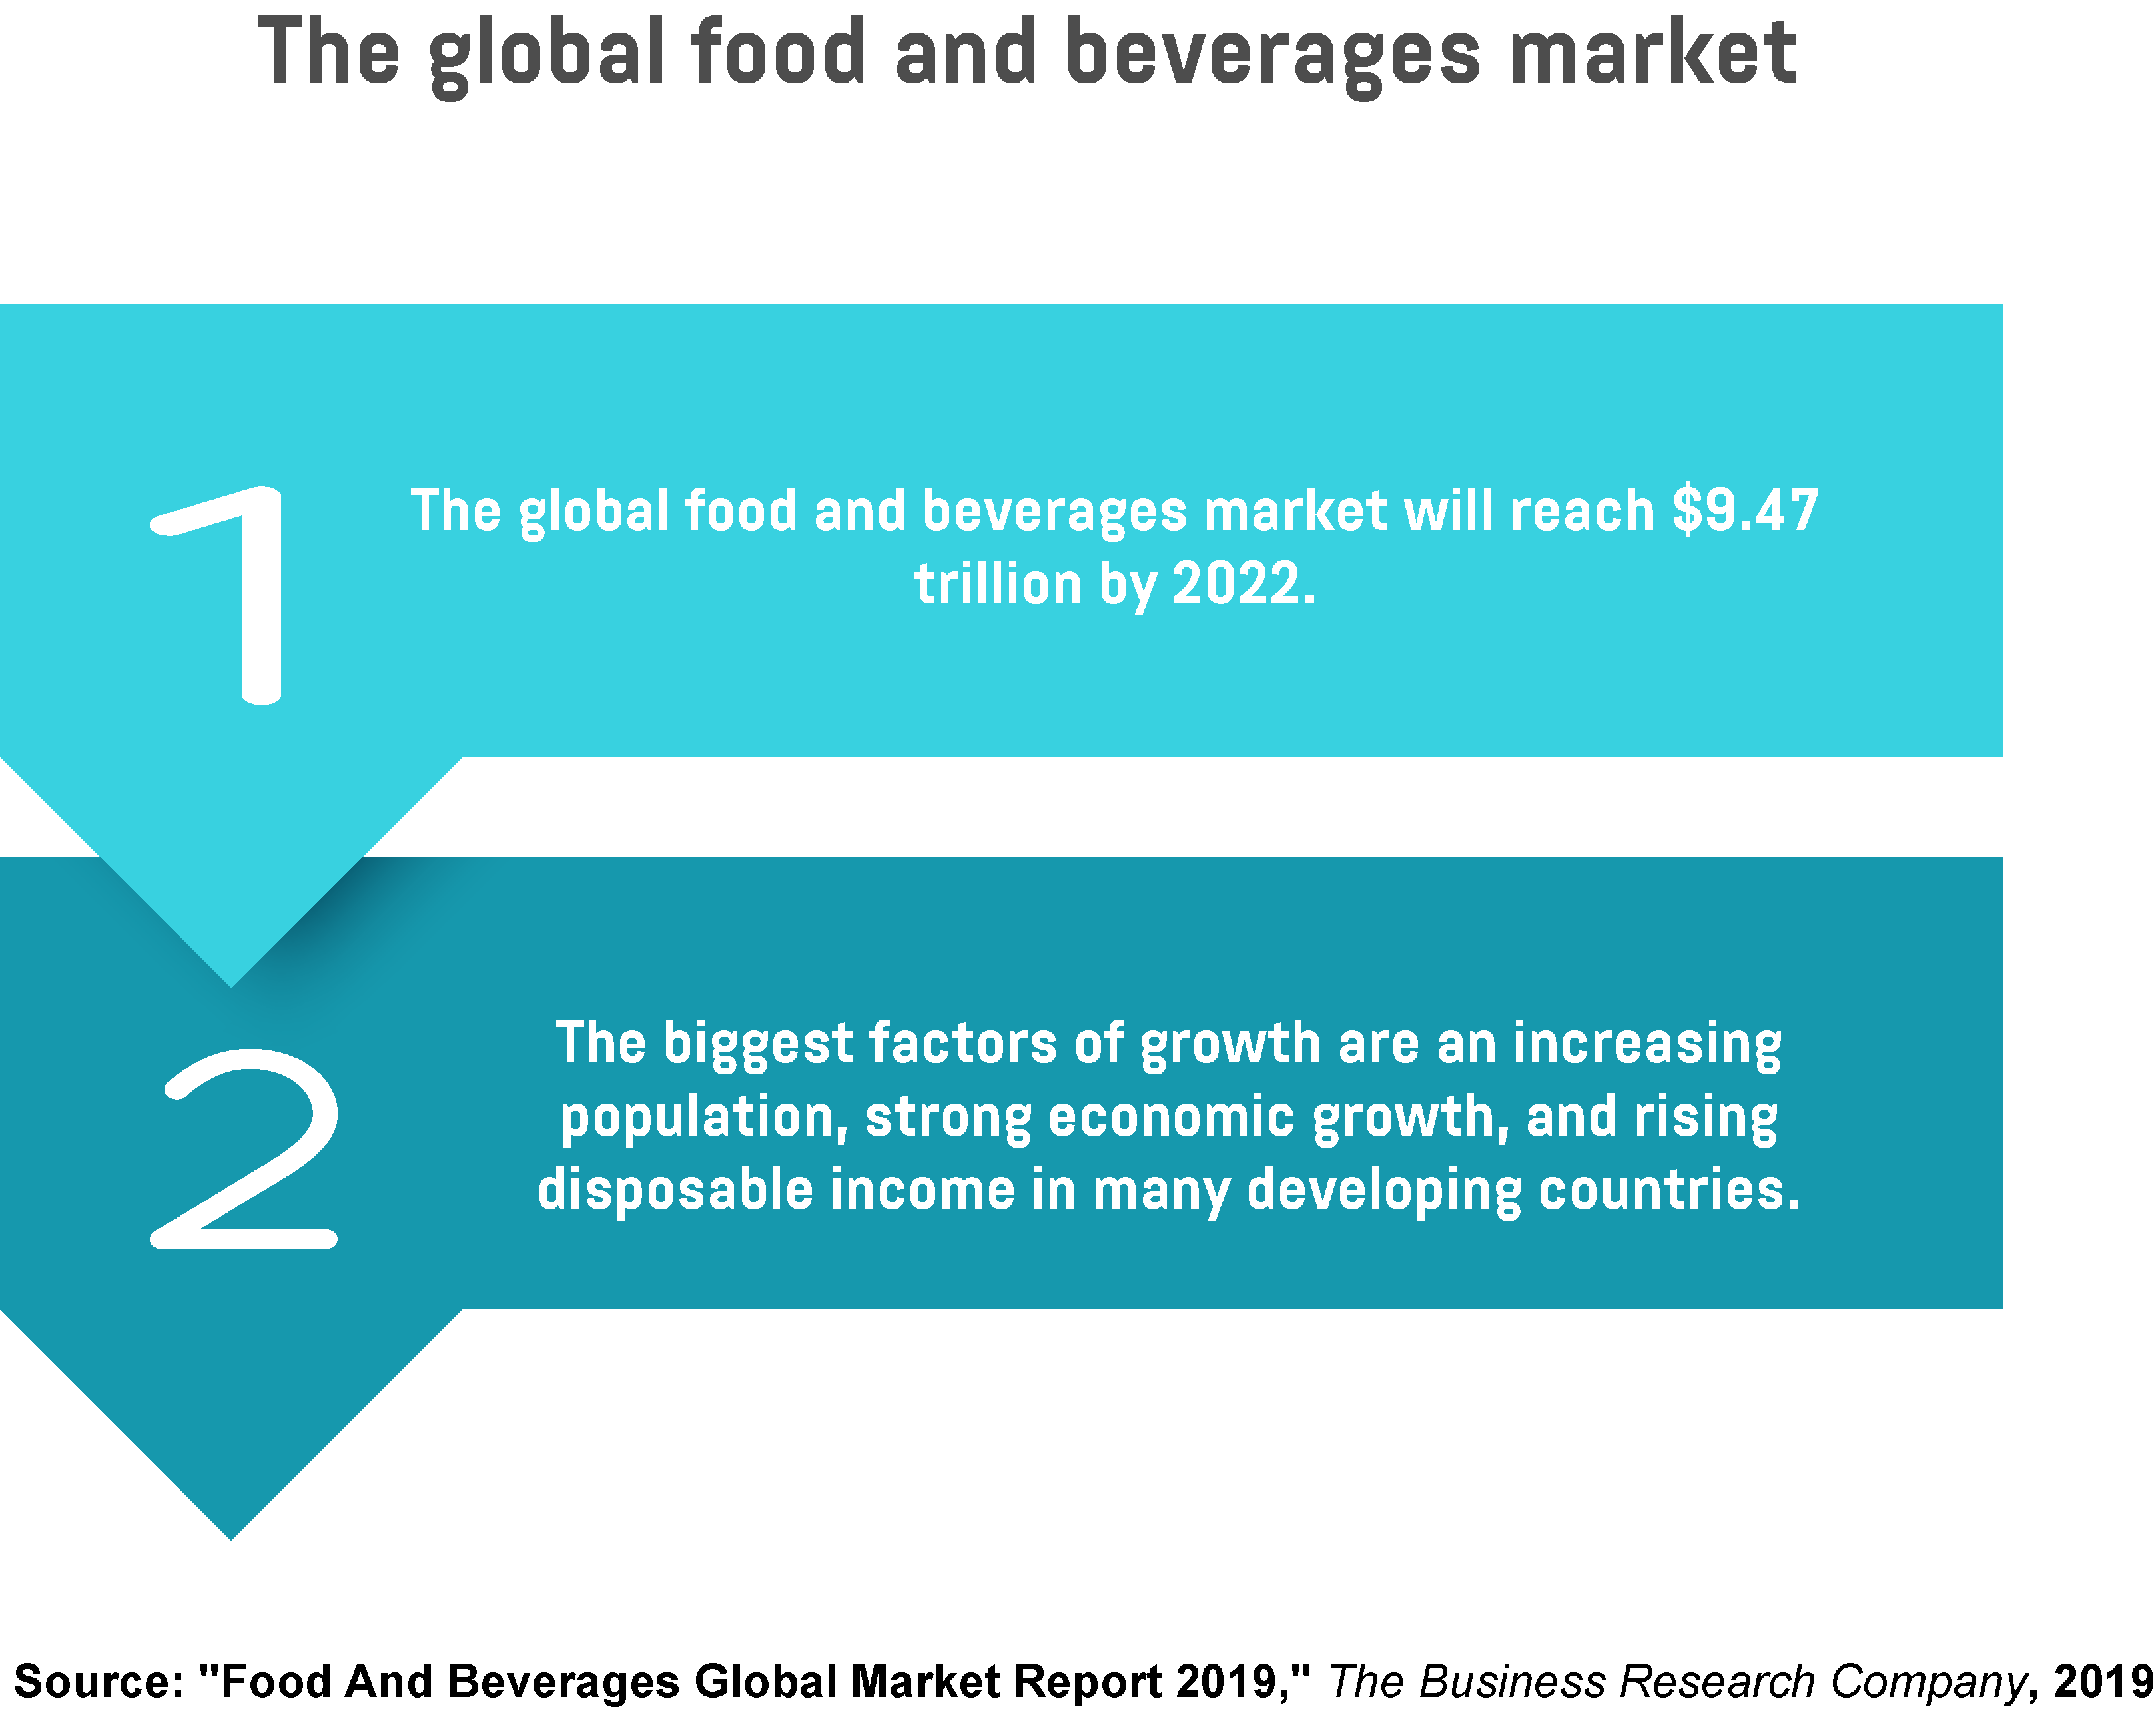 Two text boxes showing the estimated value of the global food and beverages market by 2022 and the biggest factors of growth in this industry. 